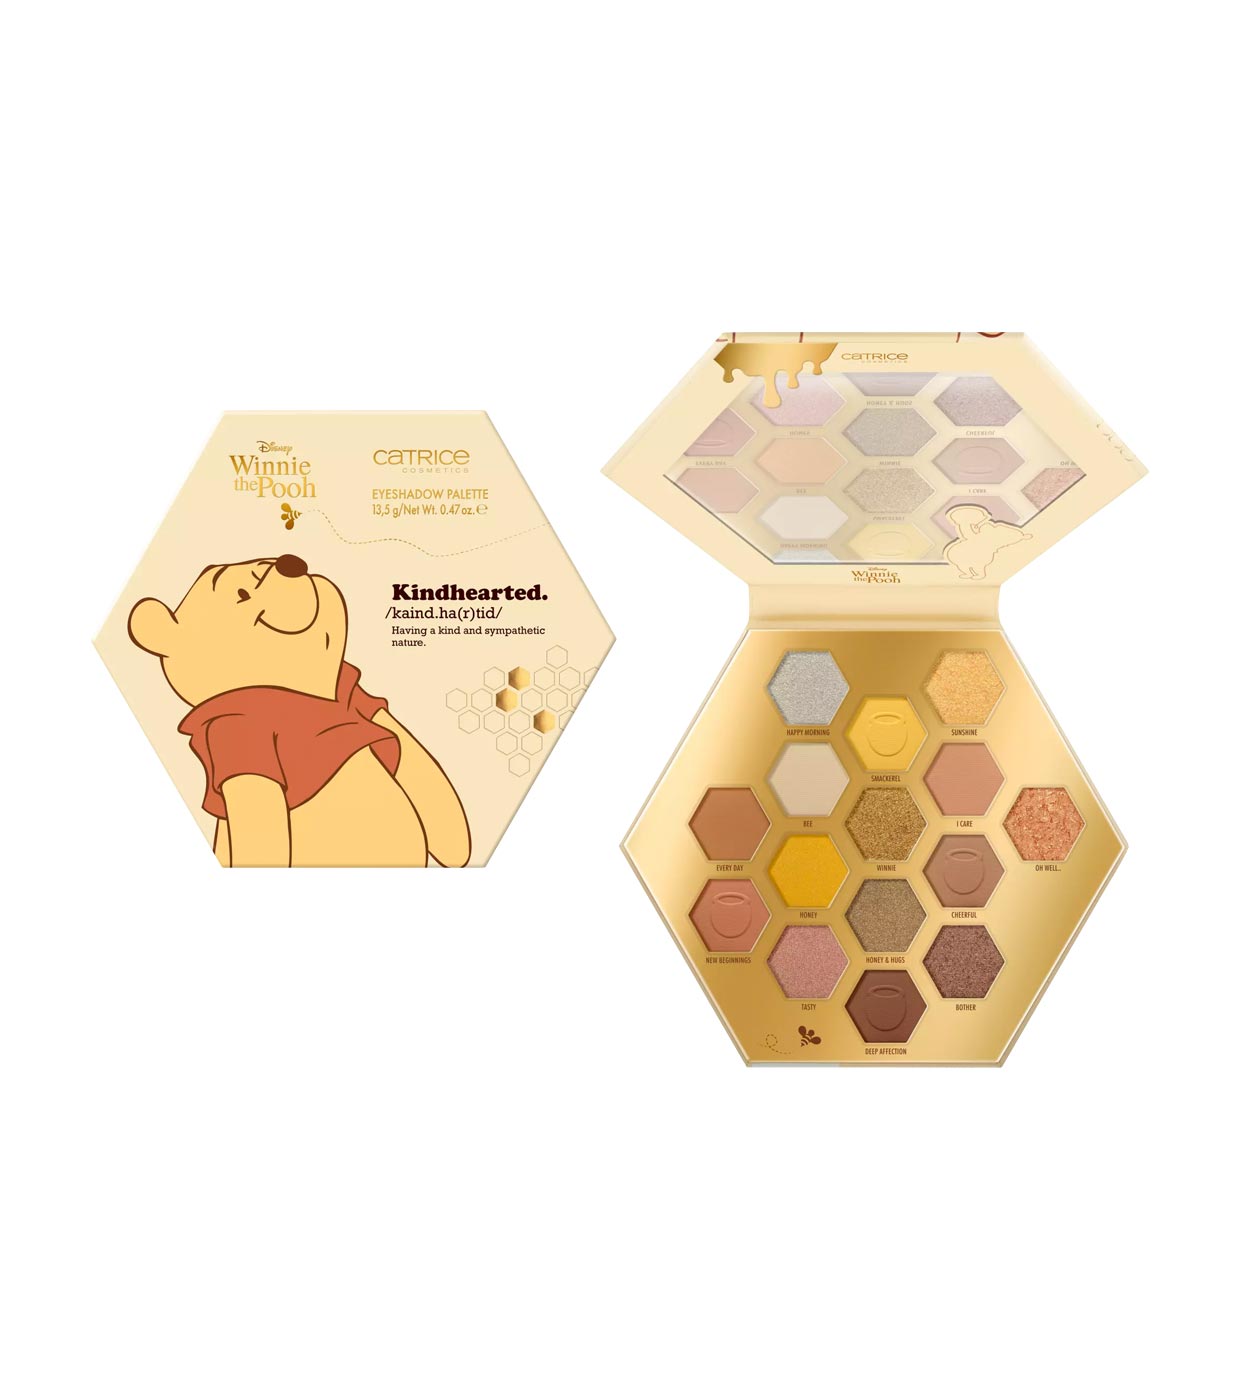 the As Sweet Bee Maquillalia - *Winnie 010: Can Palette Pooh* Buy | Catrice Eyeshadow - -